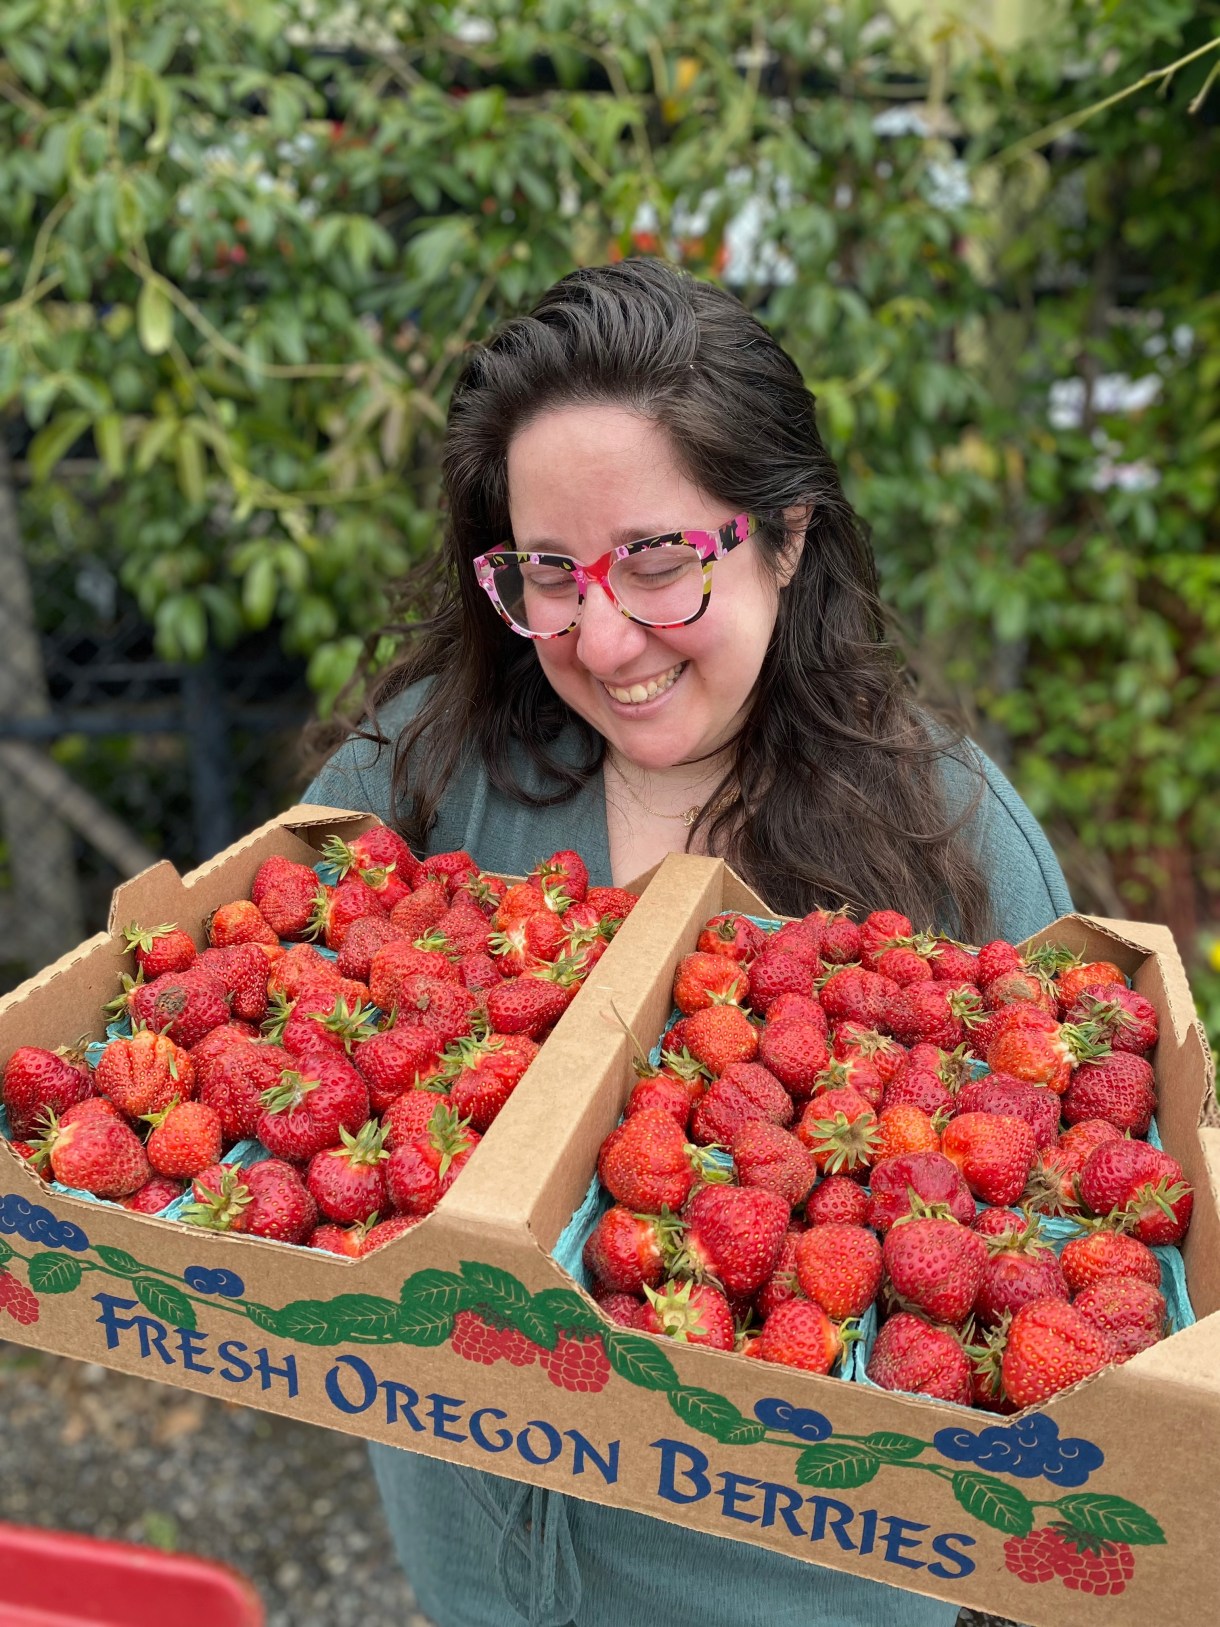 Vanessa is smiling down at a box of strawberries. She is a white woman with long brown hair and colorful floral glasses.